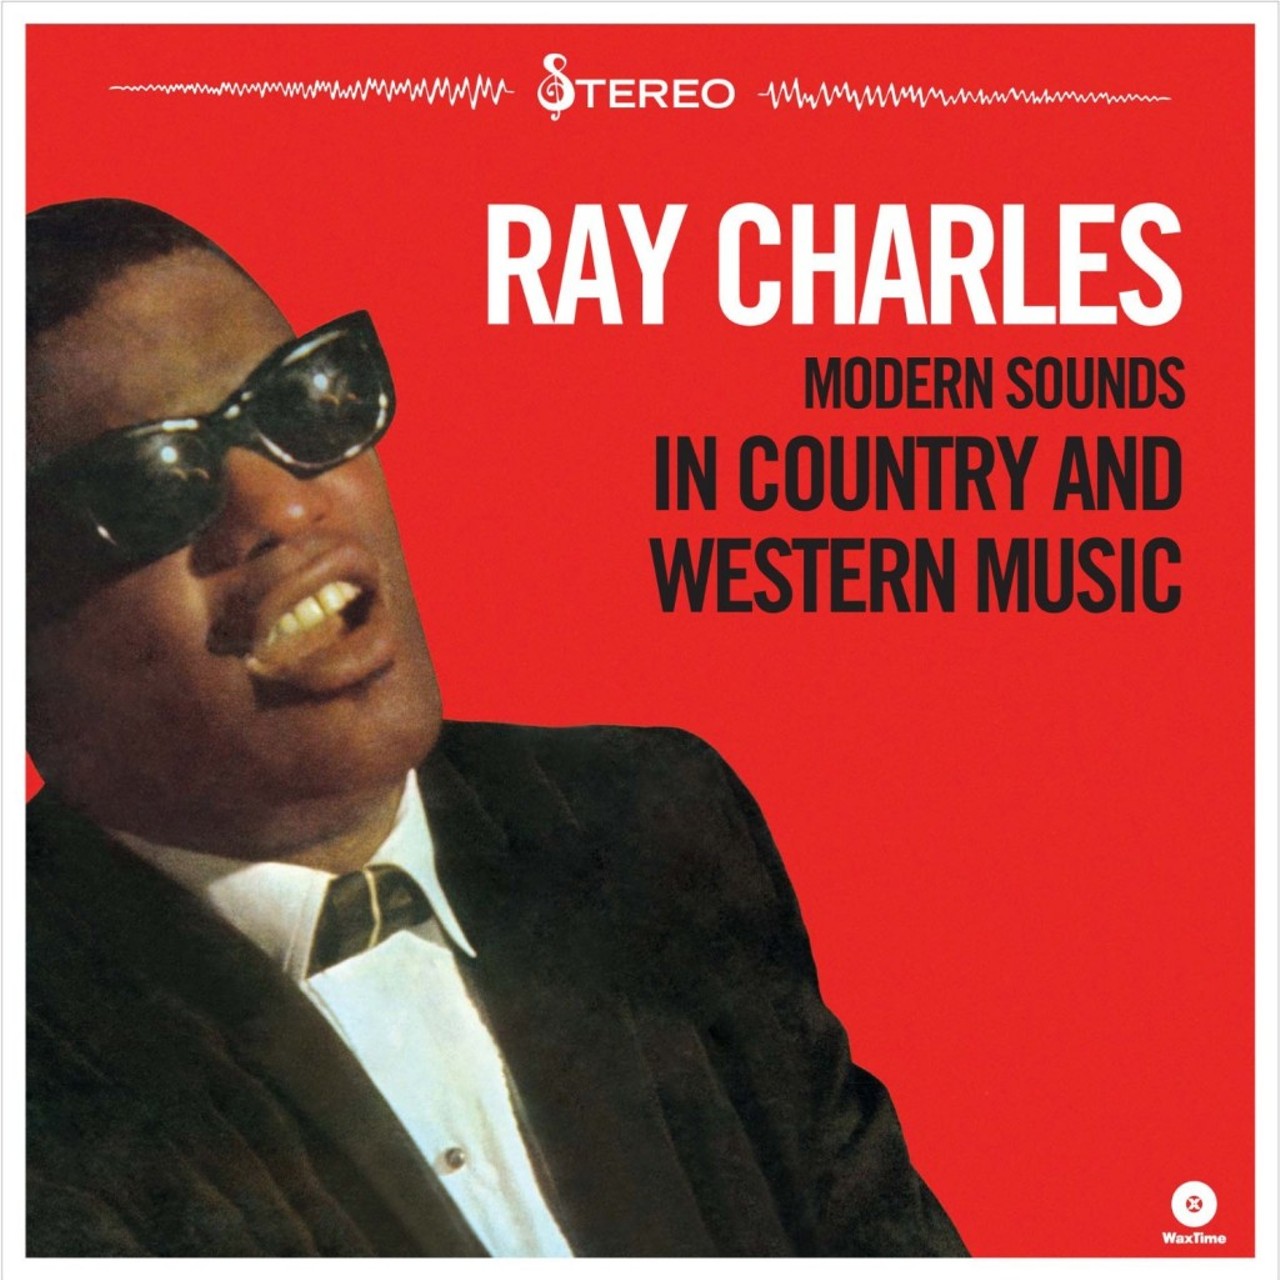 Ray Charles - Modern Sounds in Country and Western Music
This is a must for any music fan. Fuck country, soul, blues, r&b or any other genre. If you can&#146;t dig Brother Ray&#146;s sultry sounds, whatever they are &#133; check your pulse.
Via amazon.com